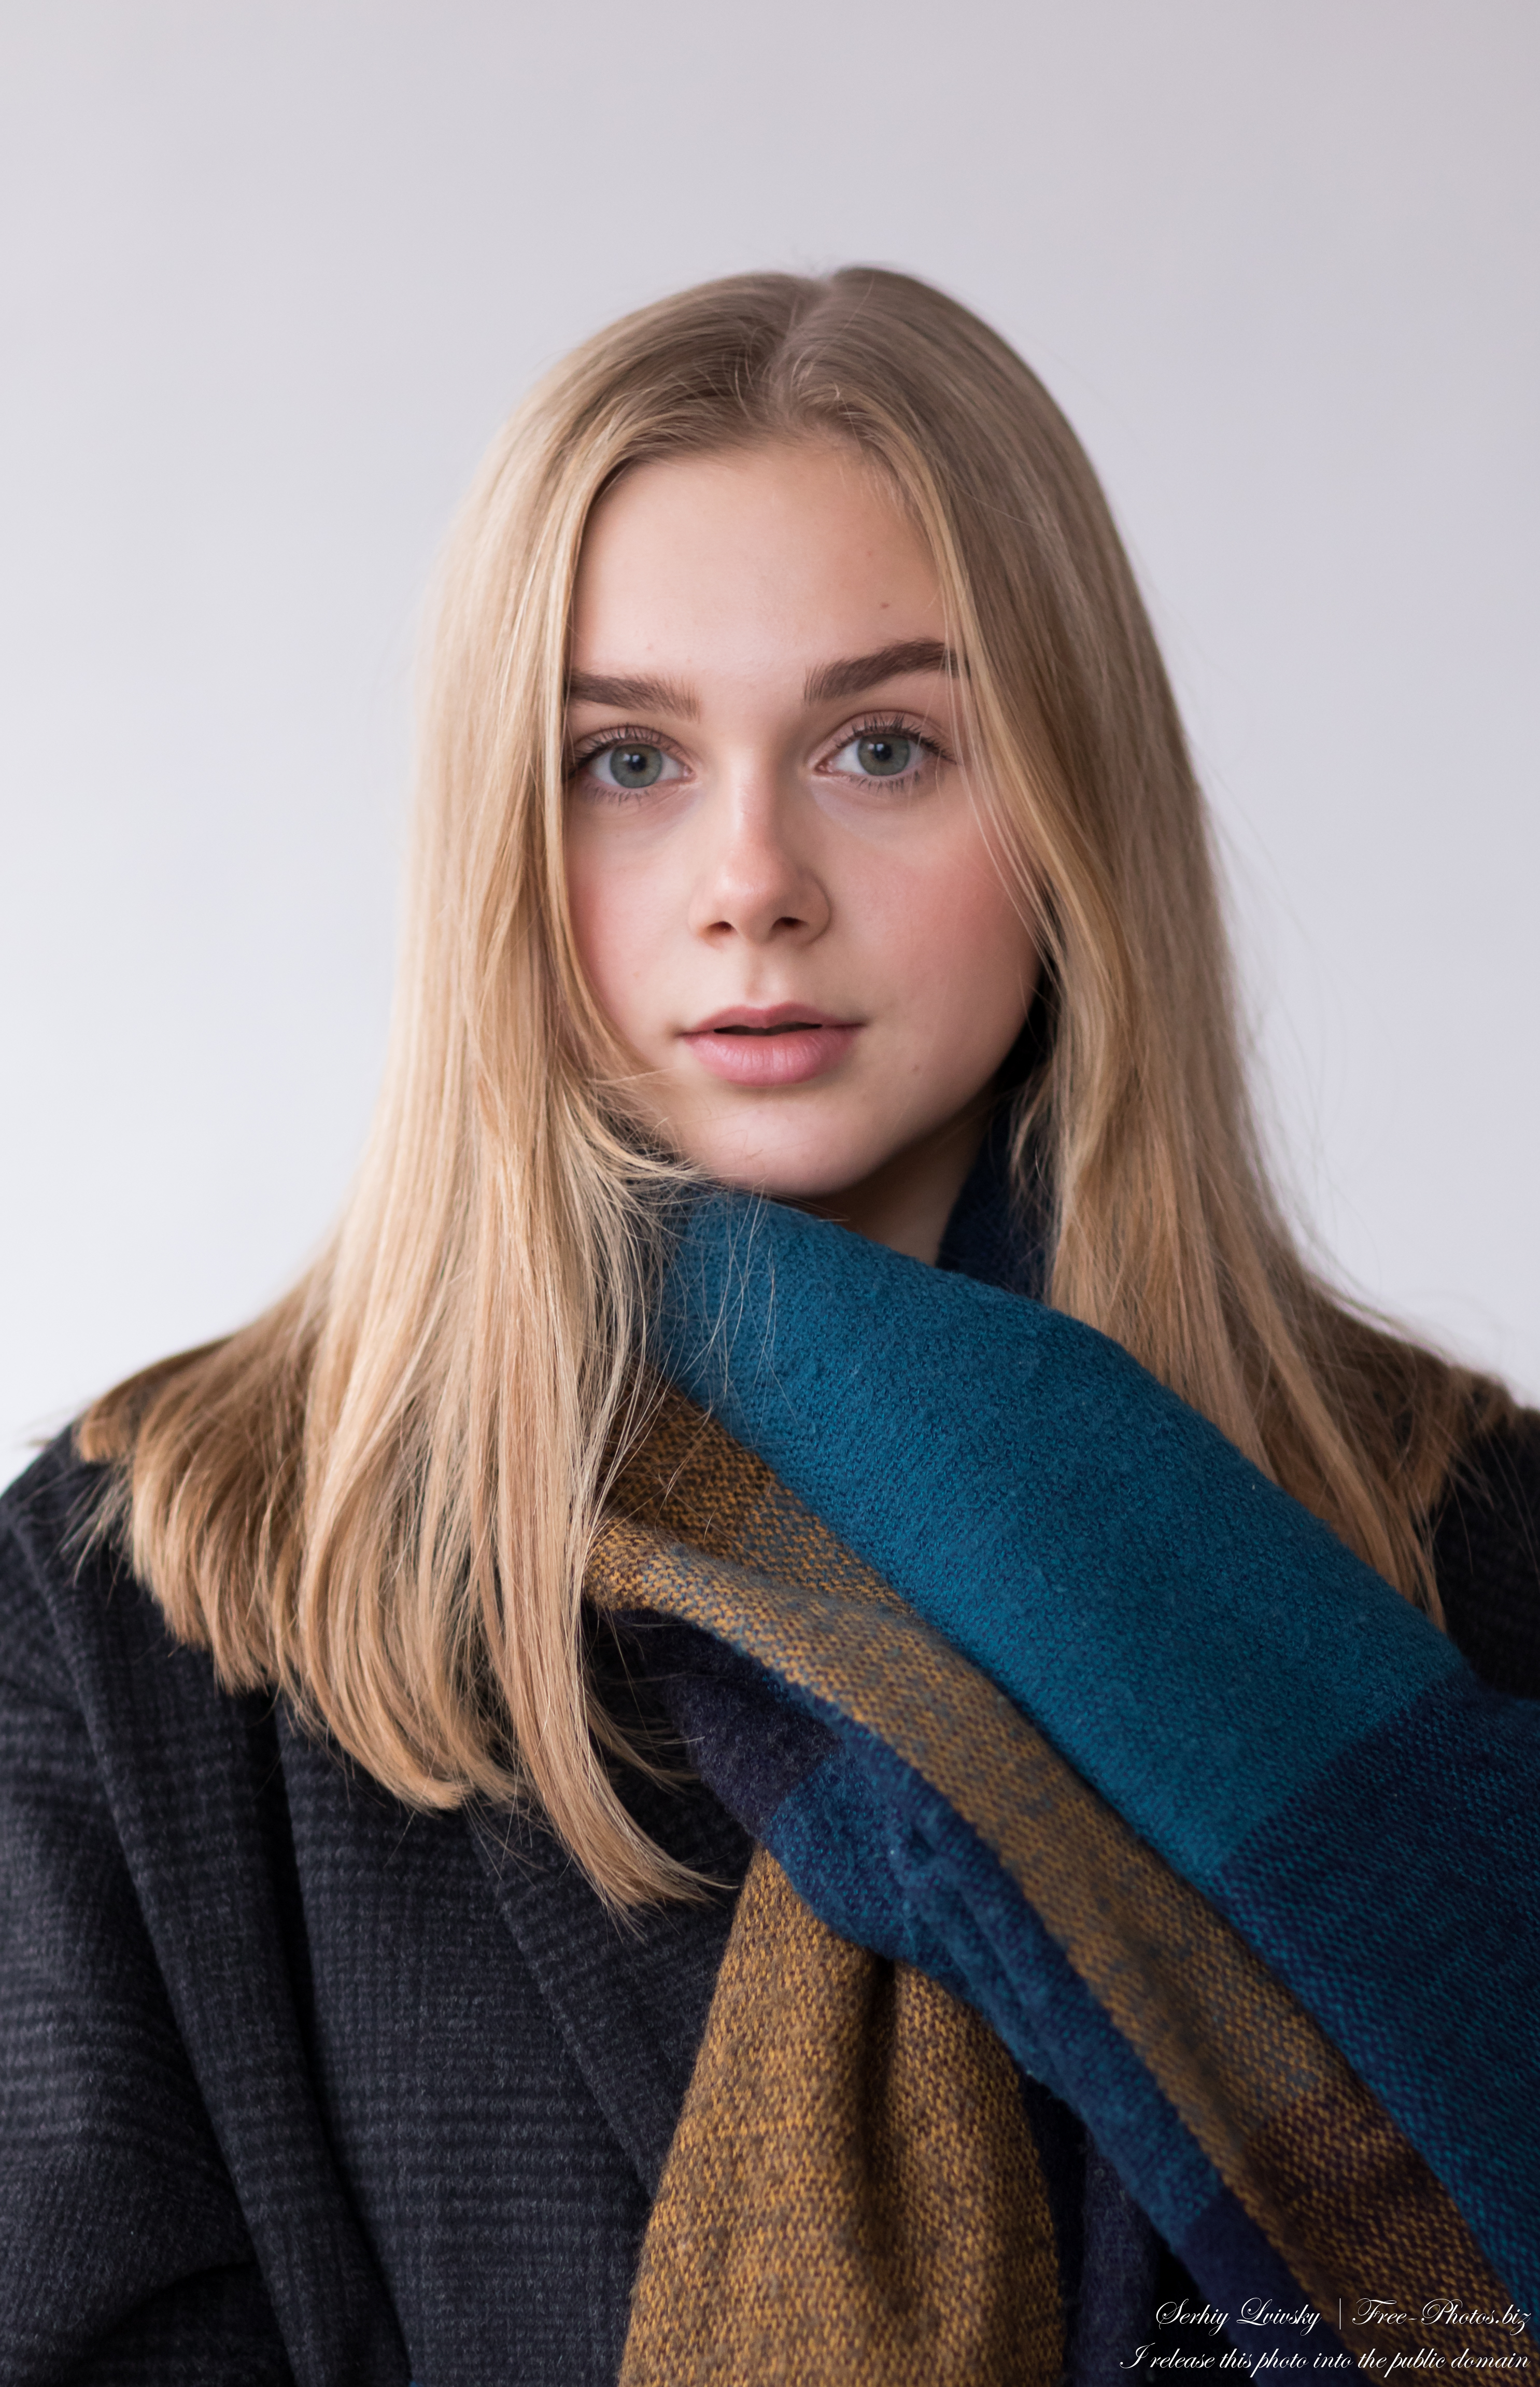 Emilia - a 15-year-old natural blonde Catholic girl photographed in November 2020 by Serhiy Lvivsky, picture 14